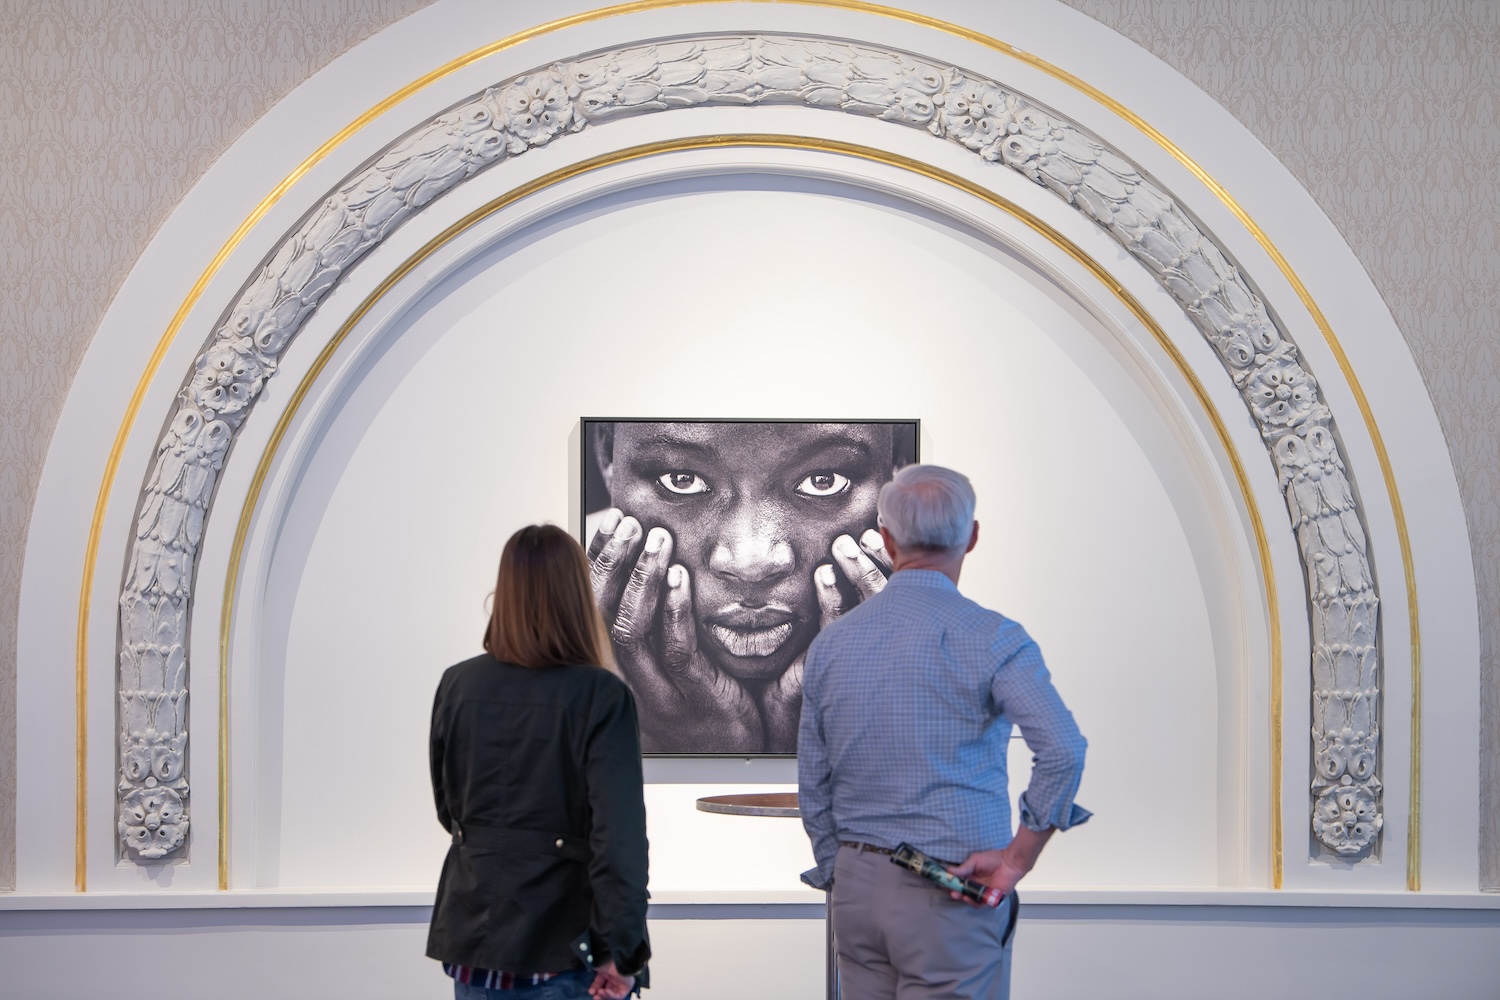 man and woman looking at art of a woman holding her face, looking directly forward, under a white arch